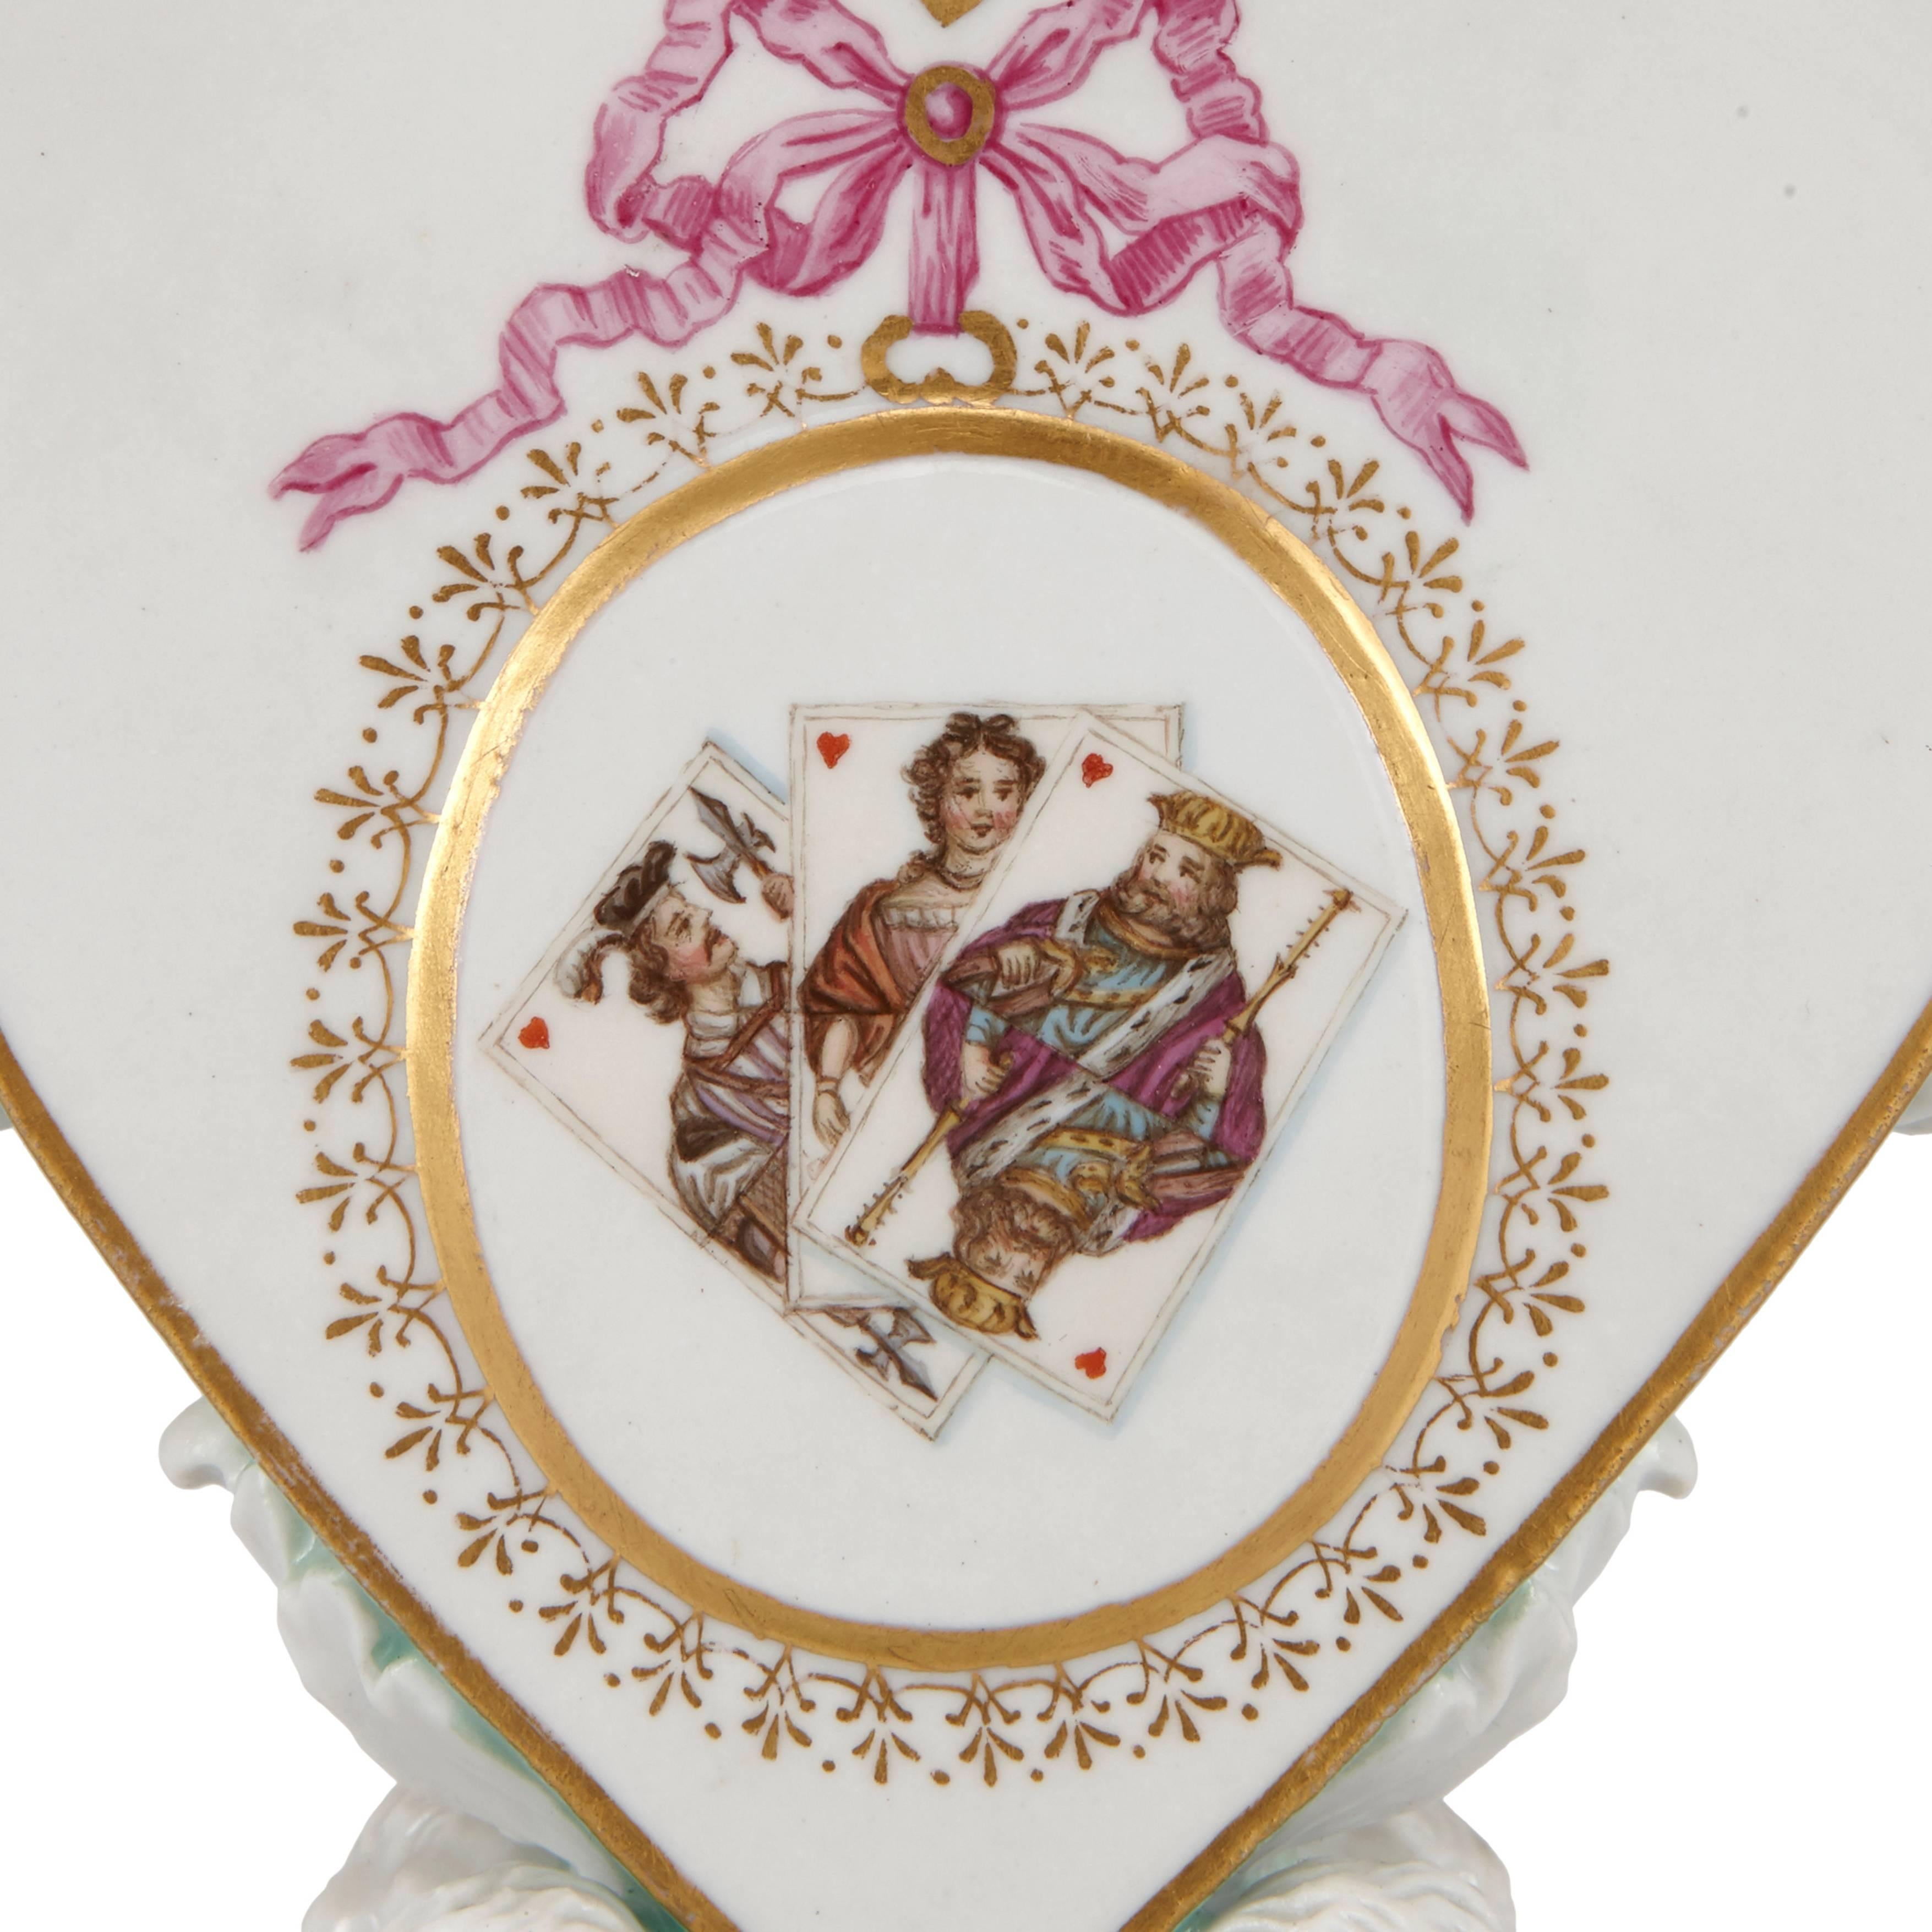 Each candleholder finely detailed to the centre with an image of playing cards to one side and crest on the reverses, each image contained within a gilt circle, further enhanced with gilt pattern work and a pink ribbon, all set within heart shaped